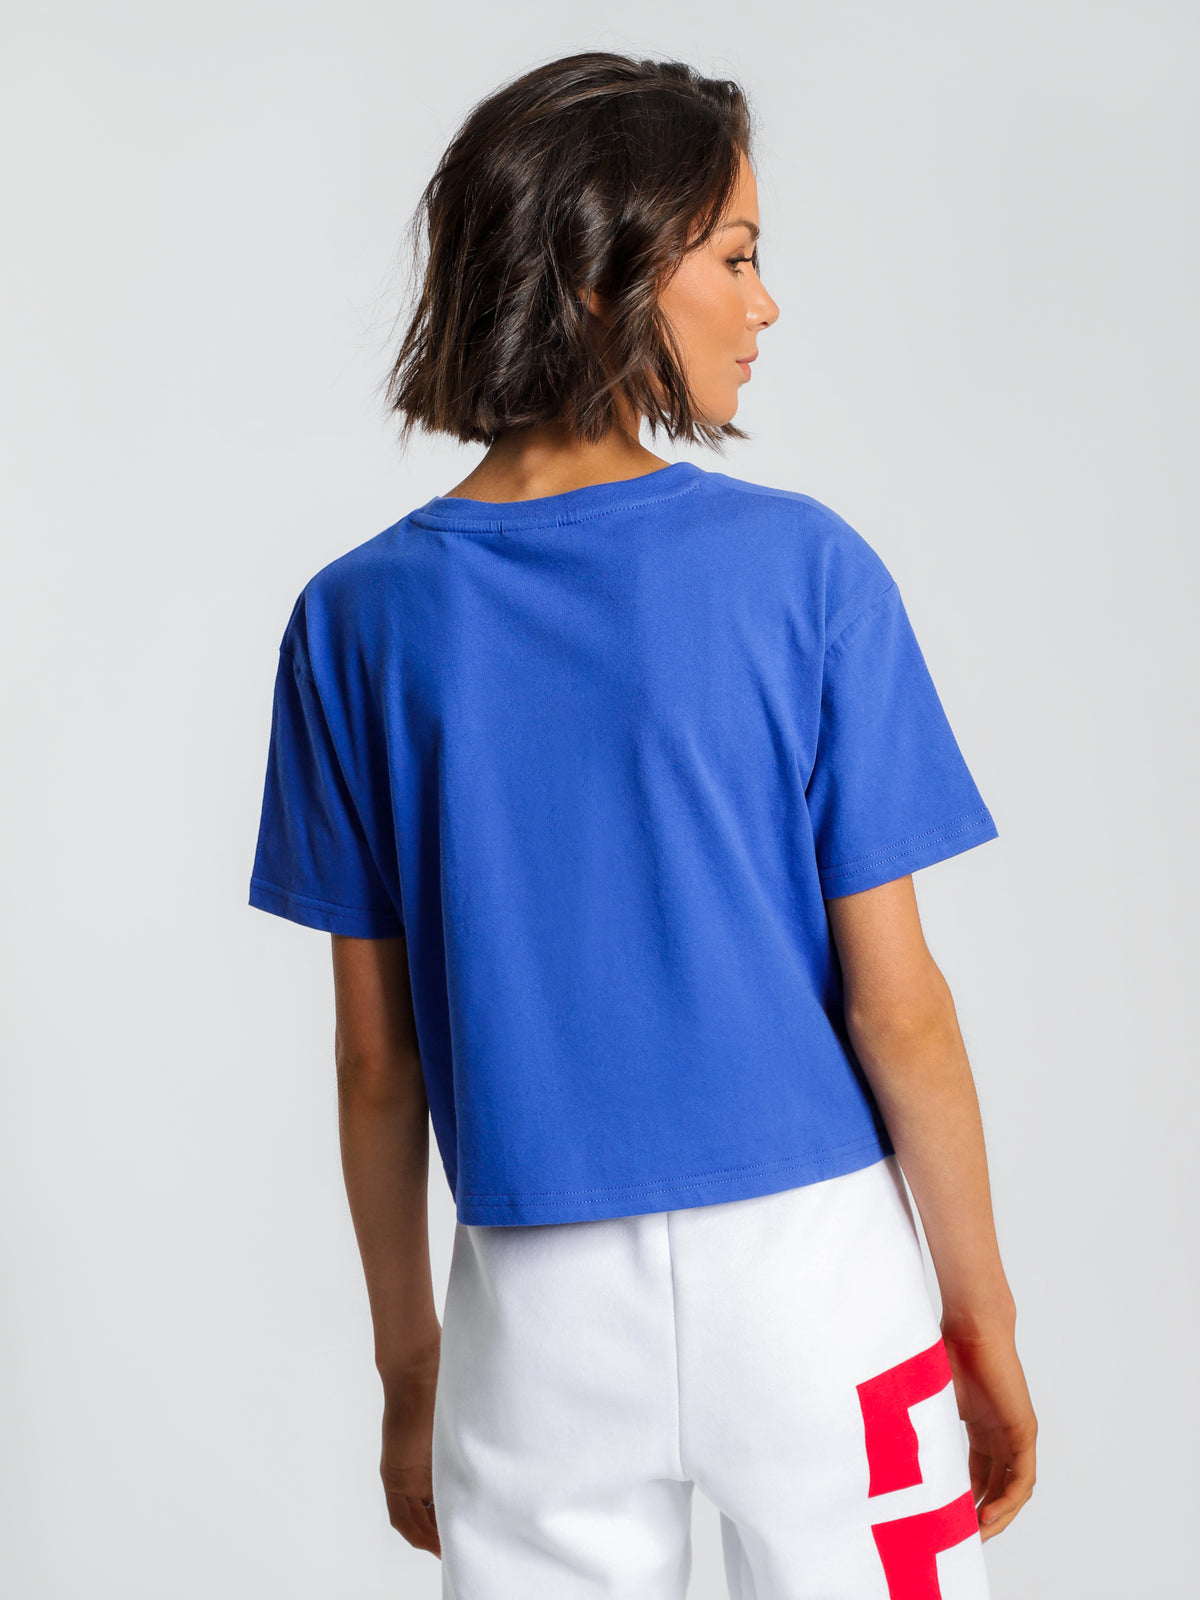 Trena T-Shirt in Blue